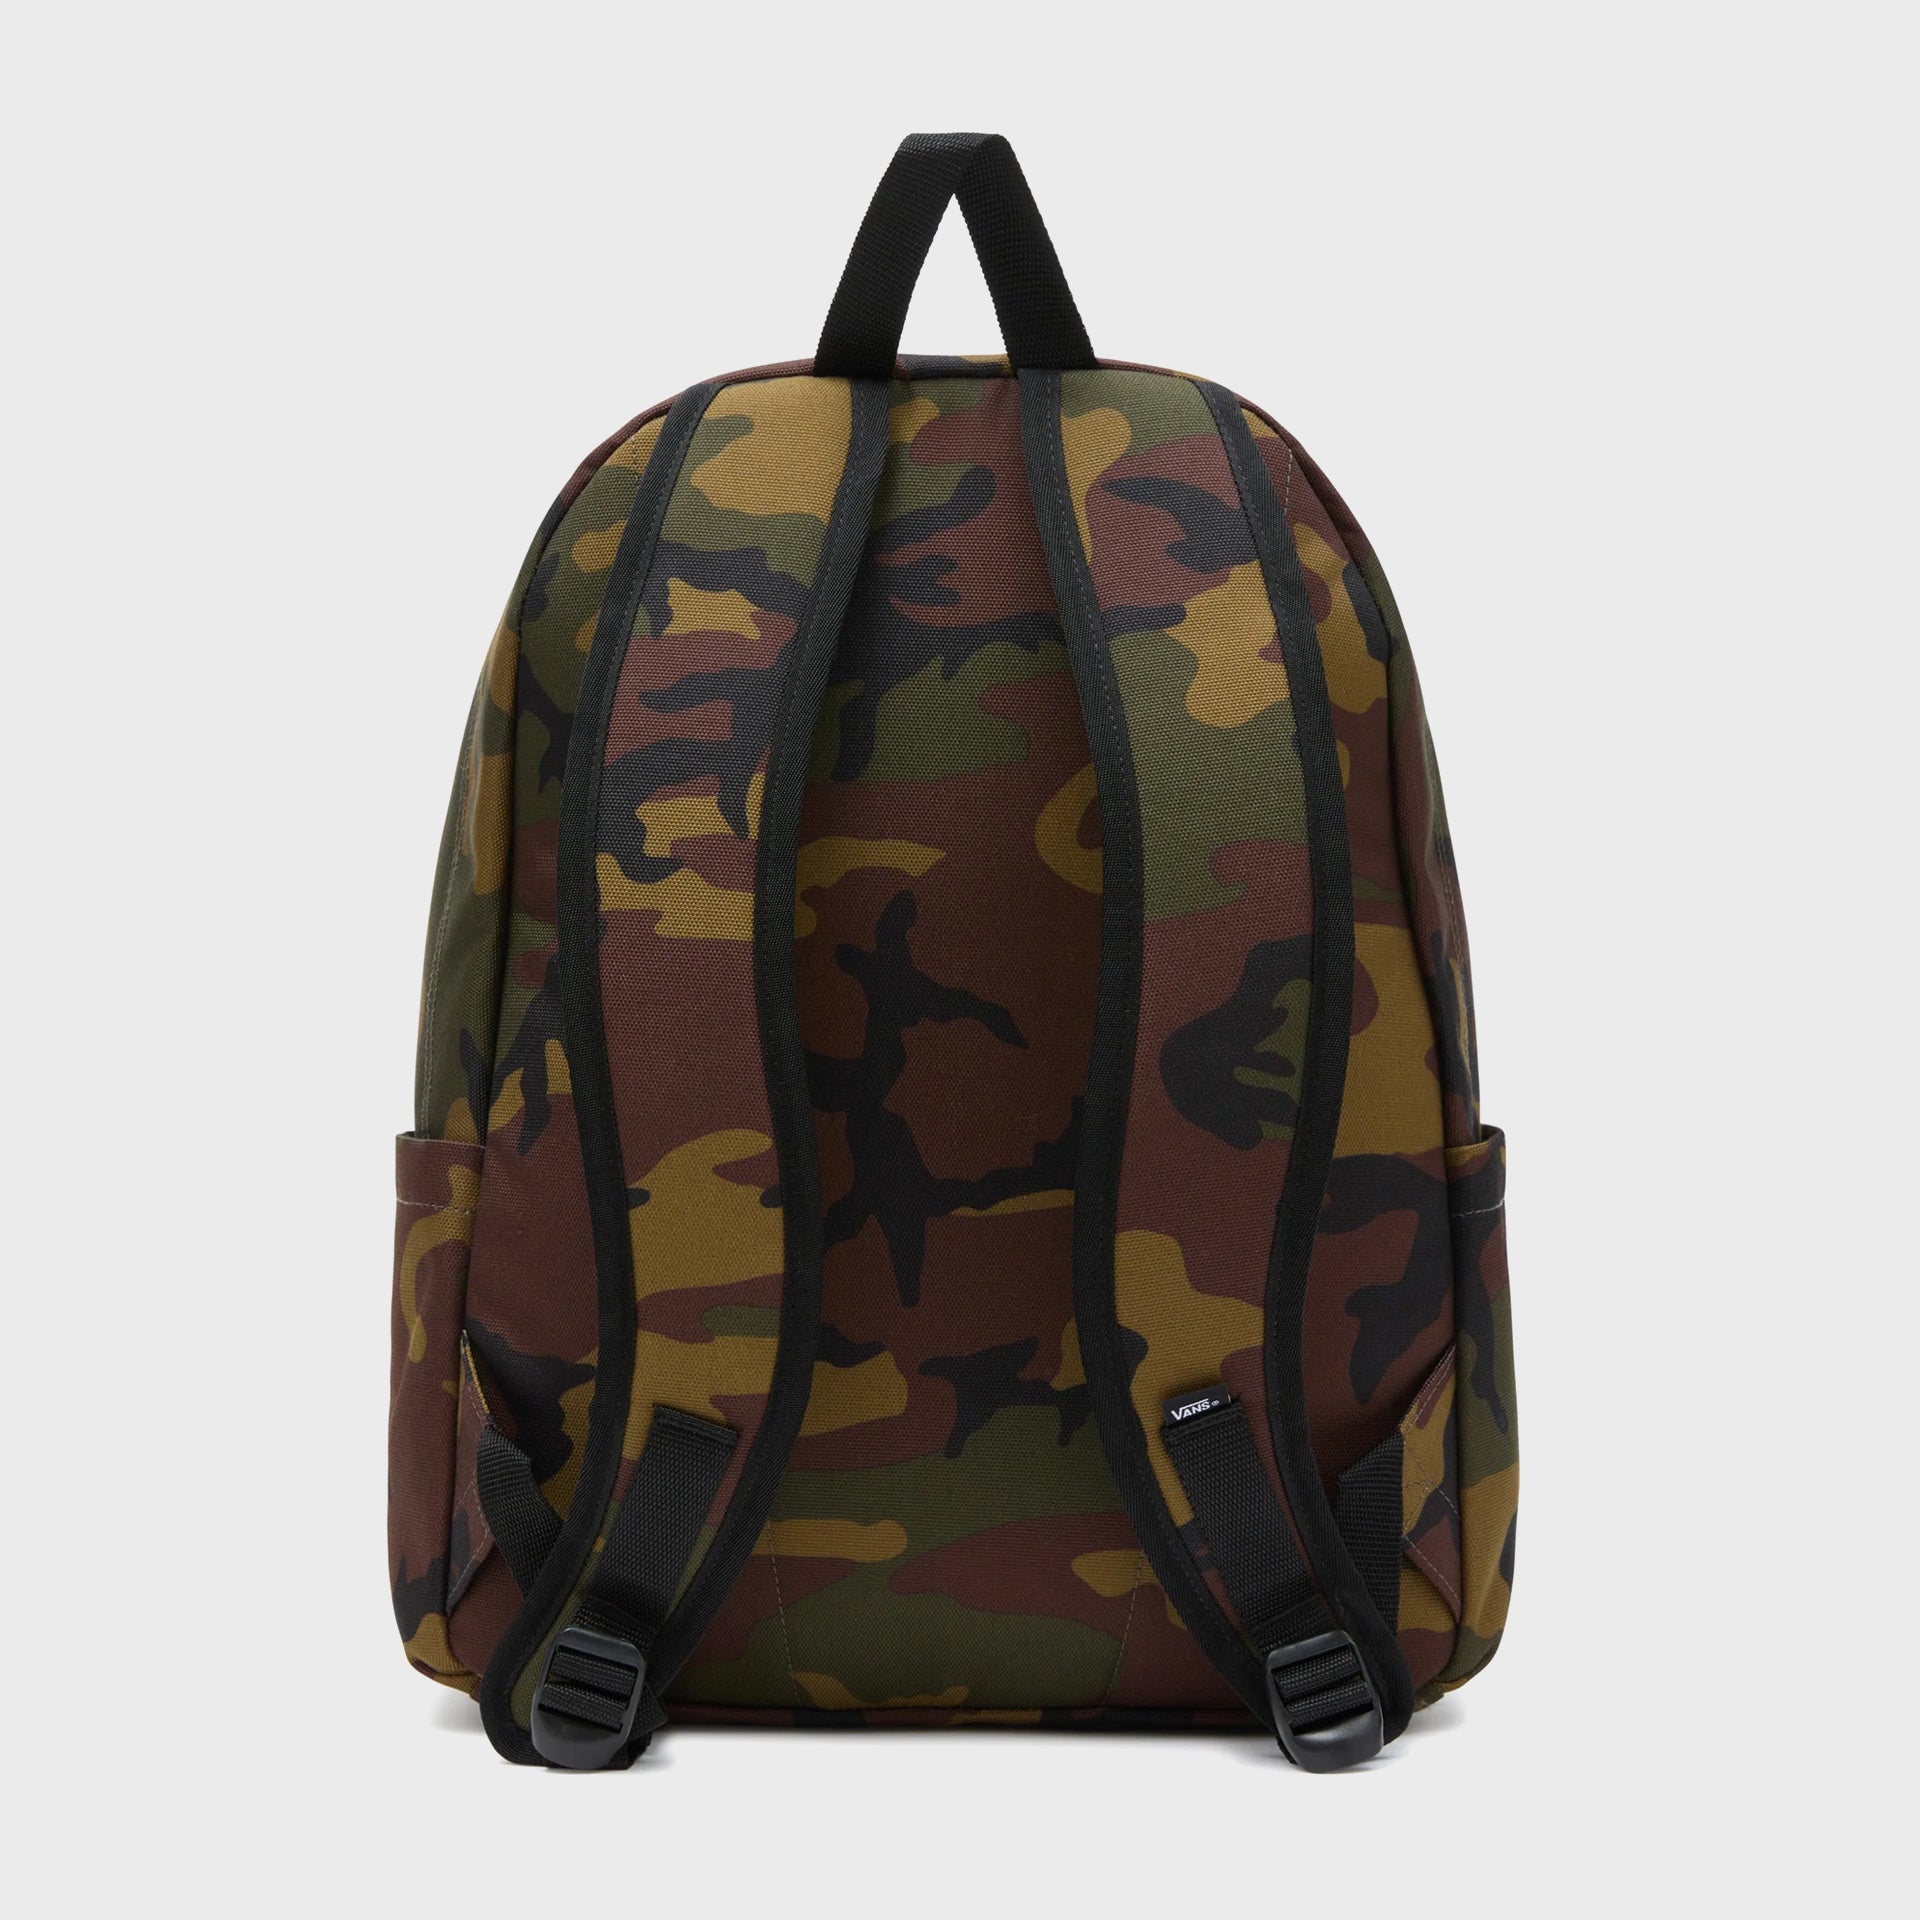 Vans Old Skool Backpack - One Size - Classic Camo - ManGo Surfing